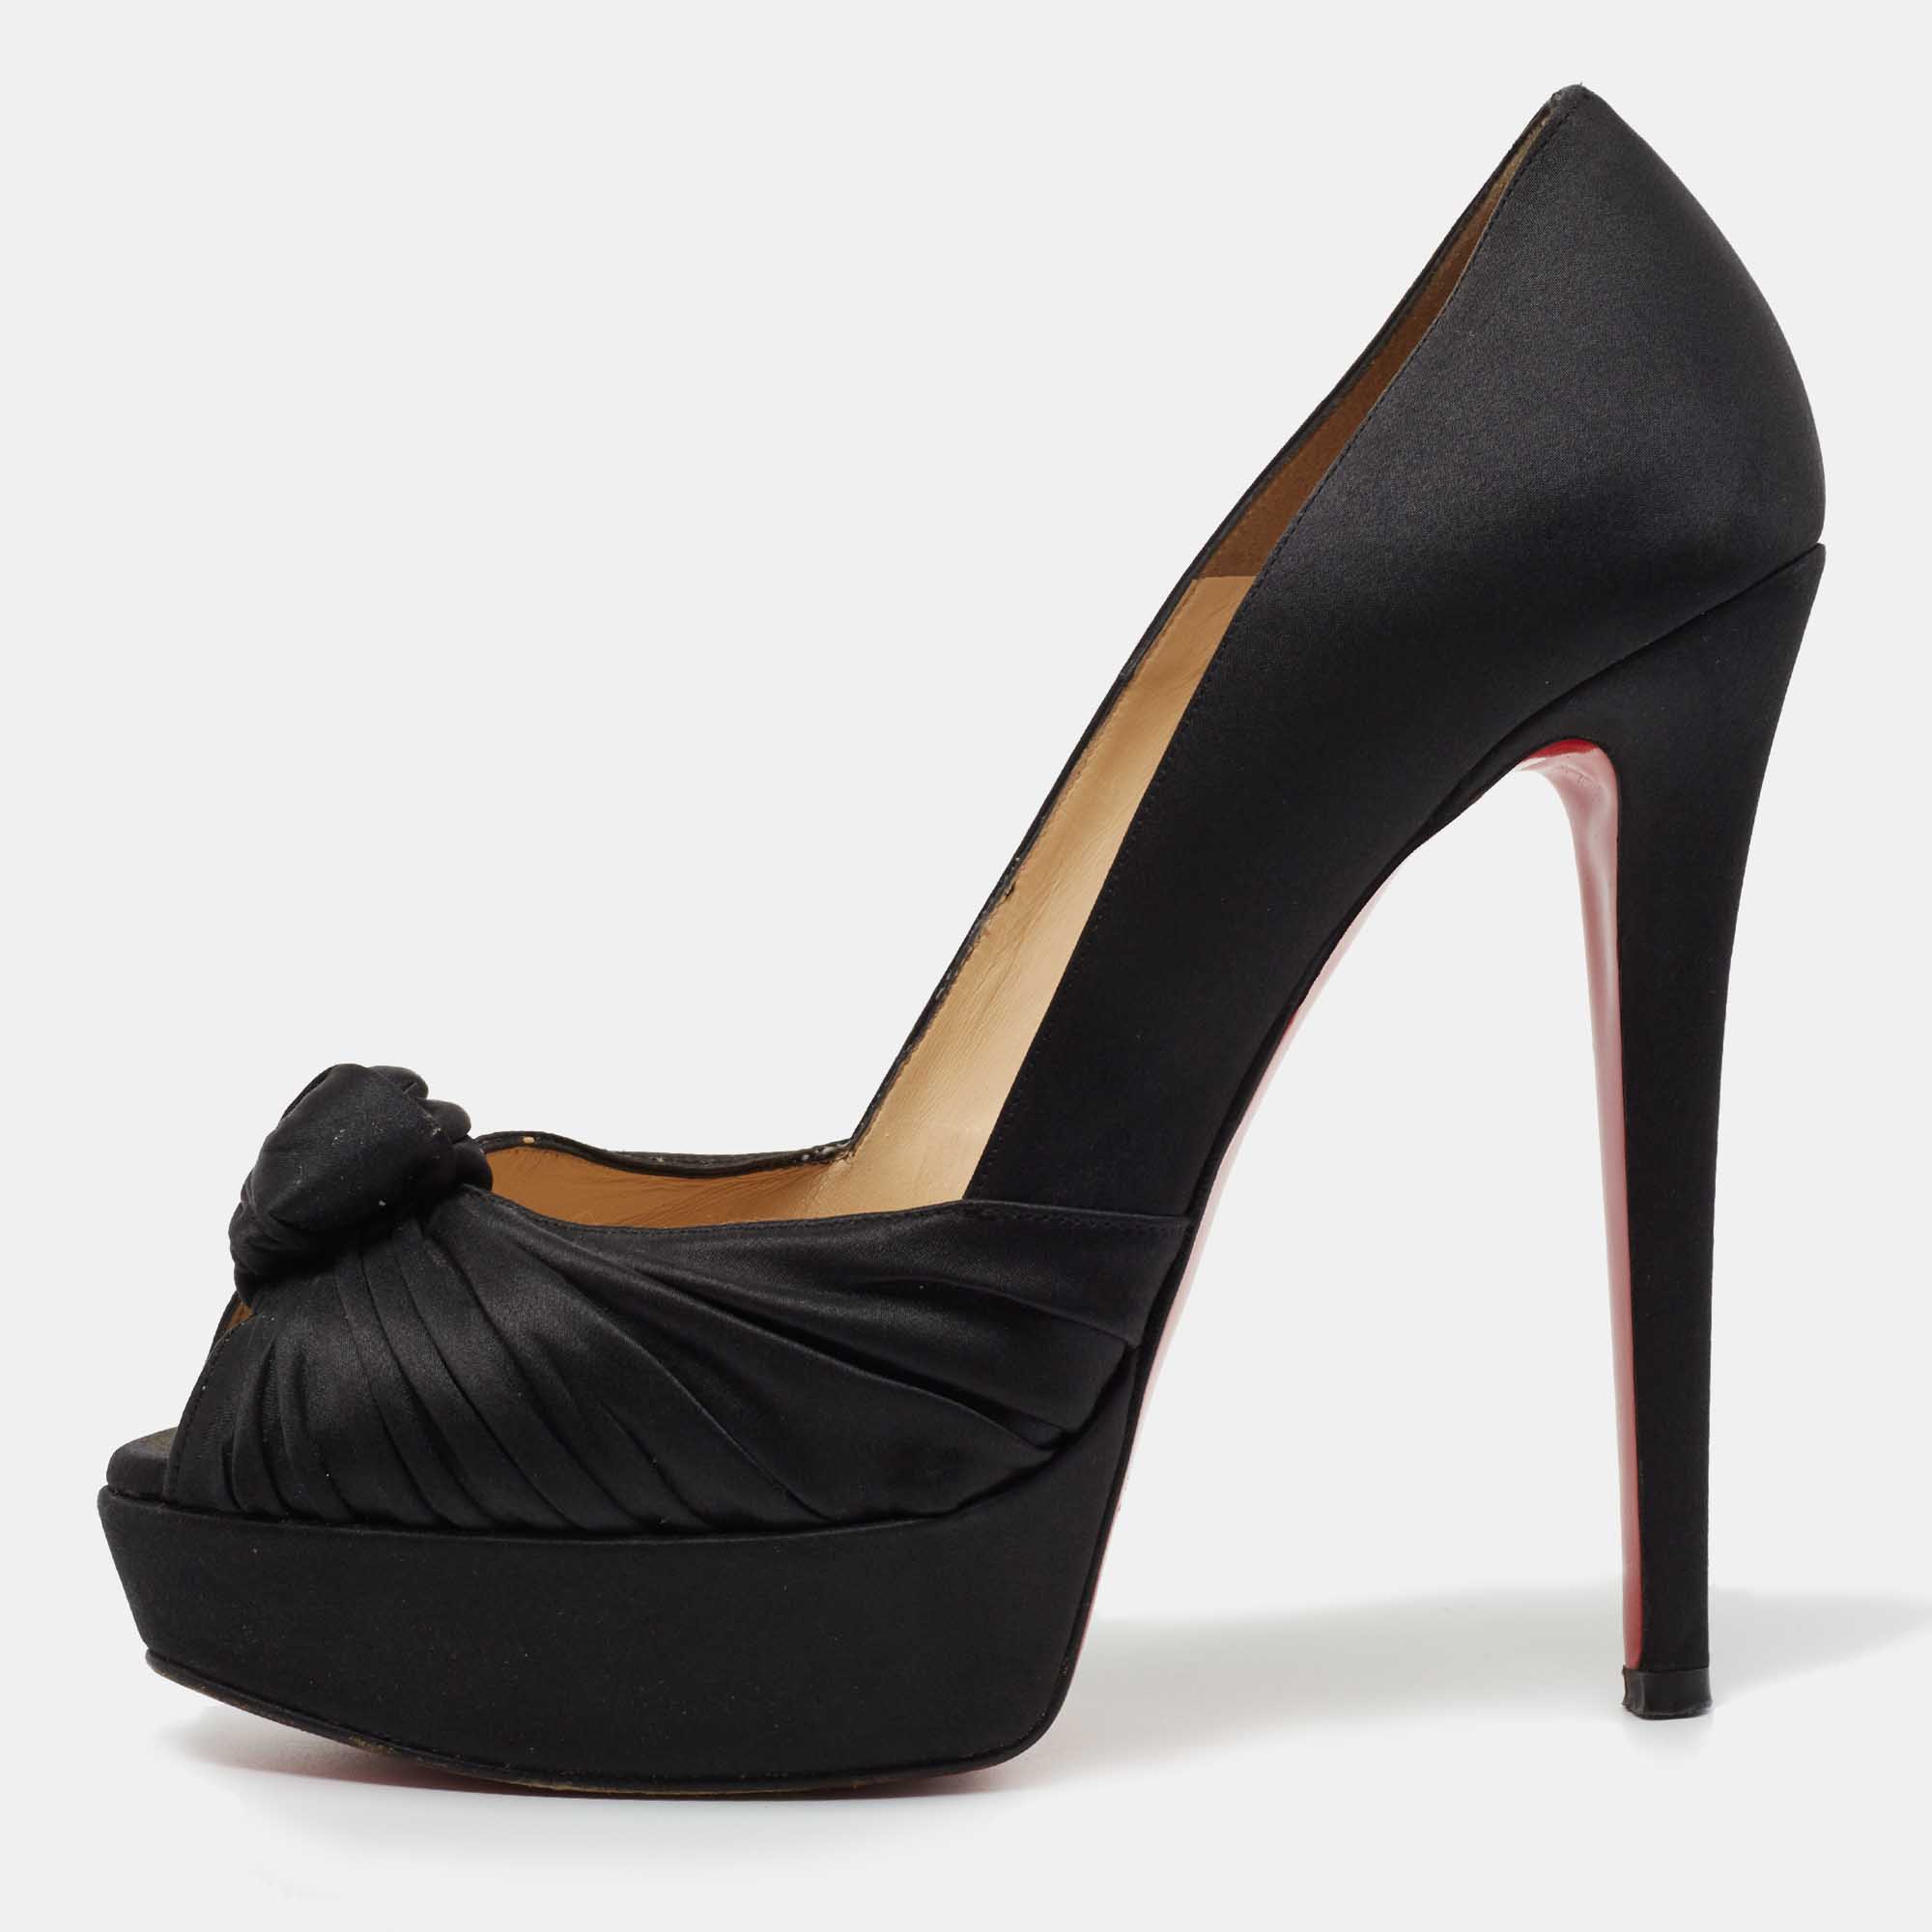 Pre-owned Christian Louboutin Black Satin Knotted Greissimo Platform Pumps Size 38